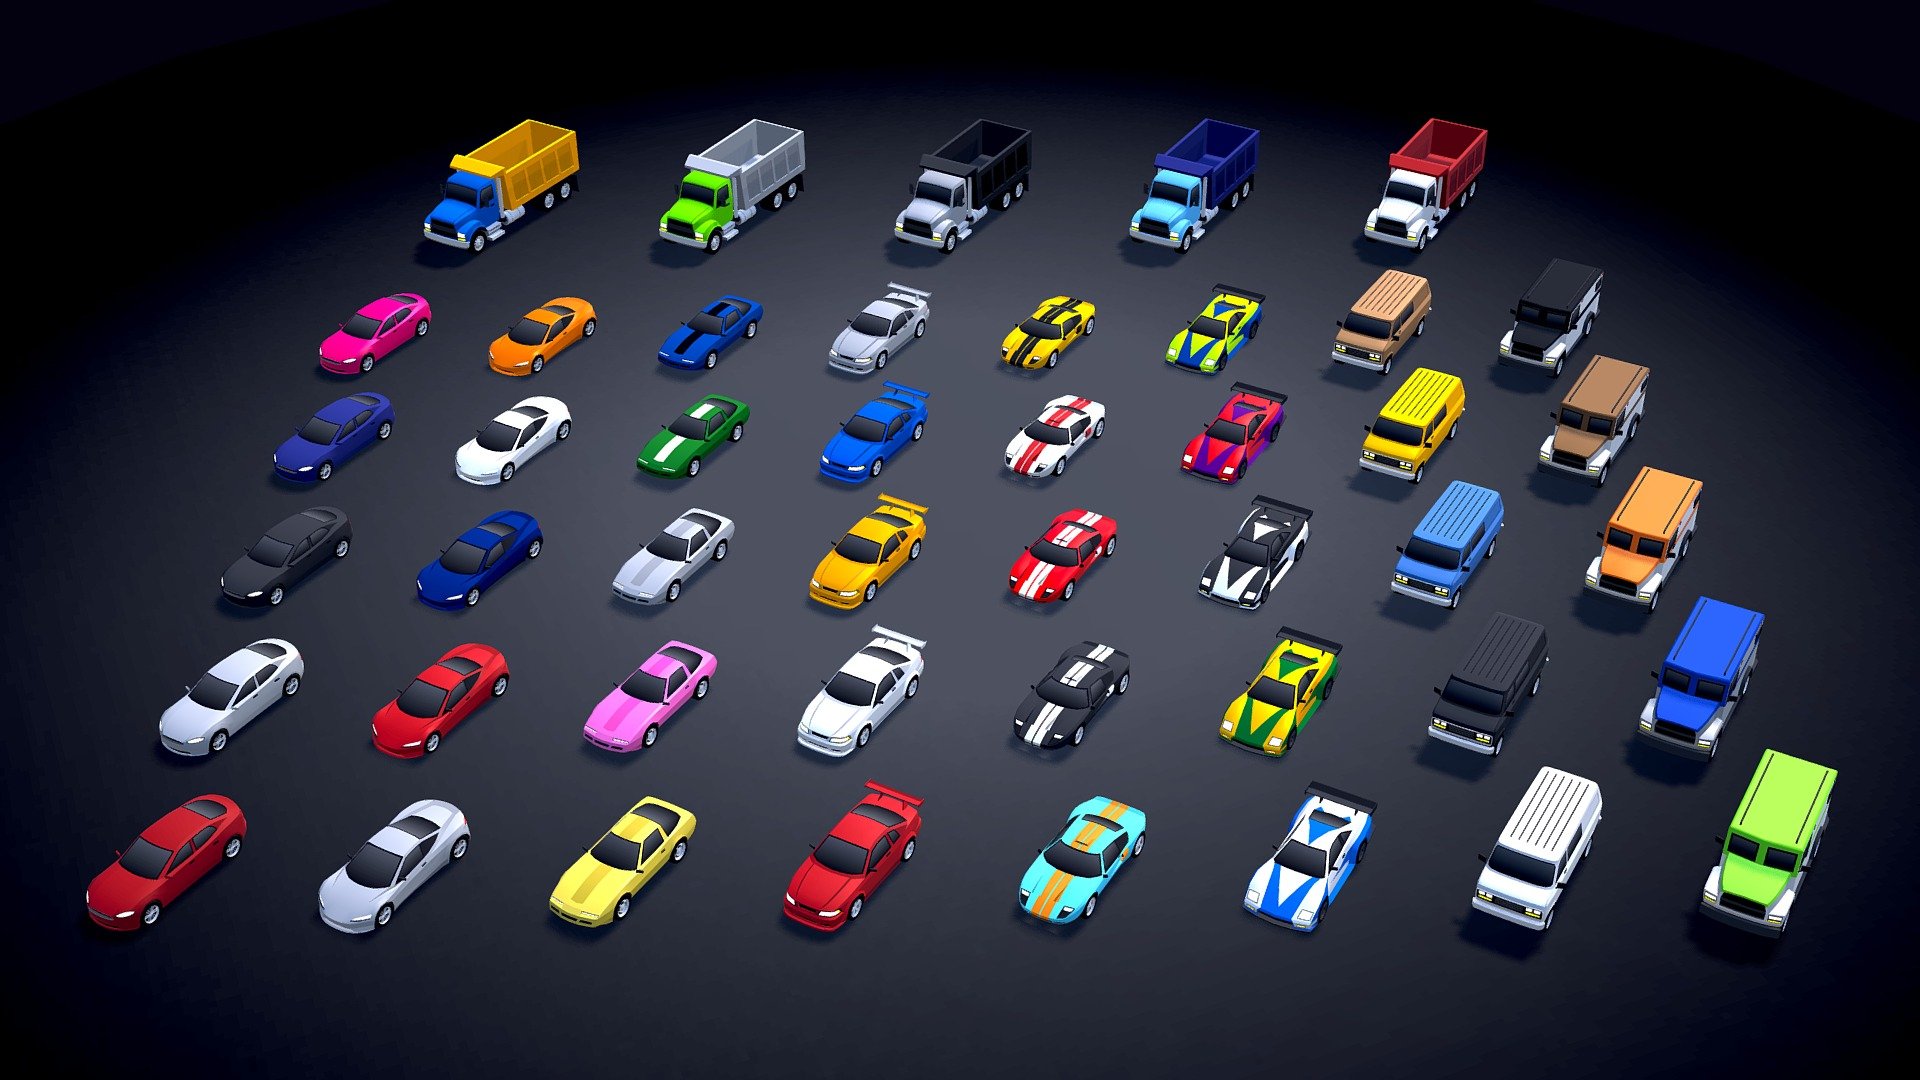 Happy New Year 2022!, this is the FREE January update (2022) of my asset called ARCADE: Ultimate Vehicles Pack. It will be launched on the 4th of January 2022.

This asset is available for Unity3D (in the Unity Asset Store) and Sketchfab.

The update includes 9 new vehicles (electric cars, trucks, and more).

Best regards, Mena 3d model